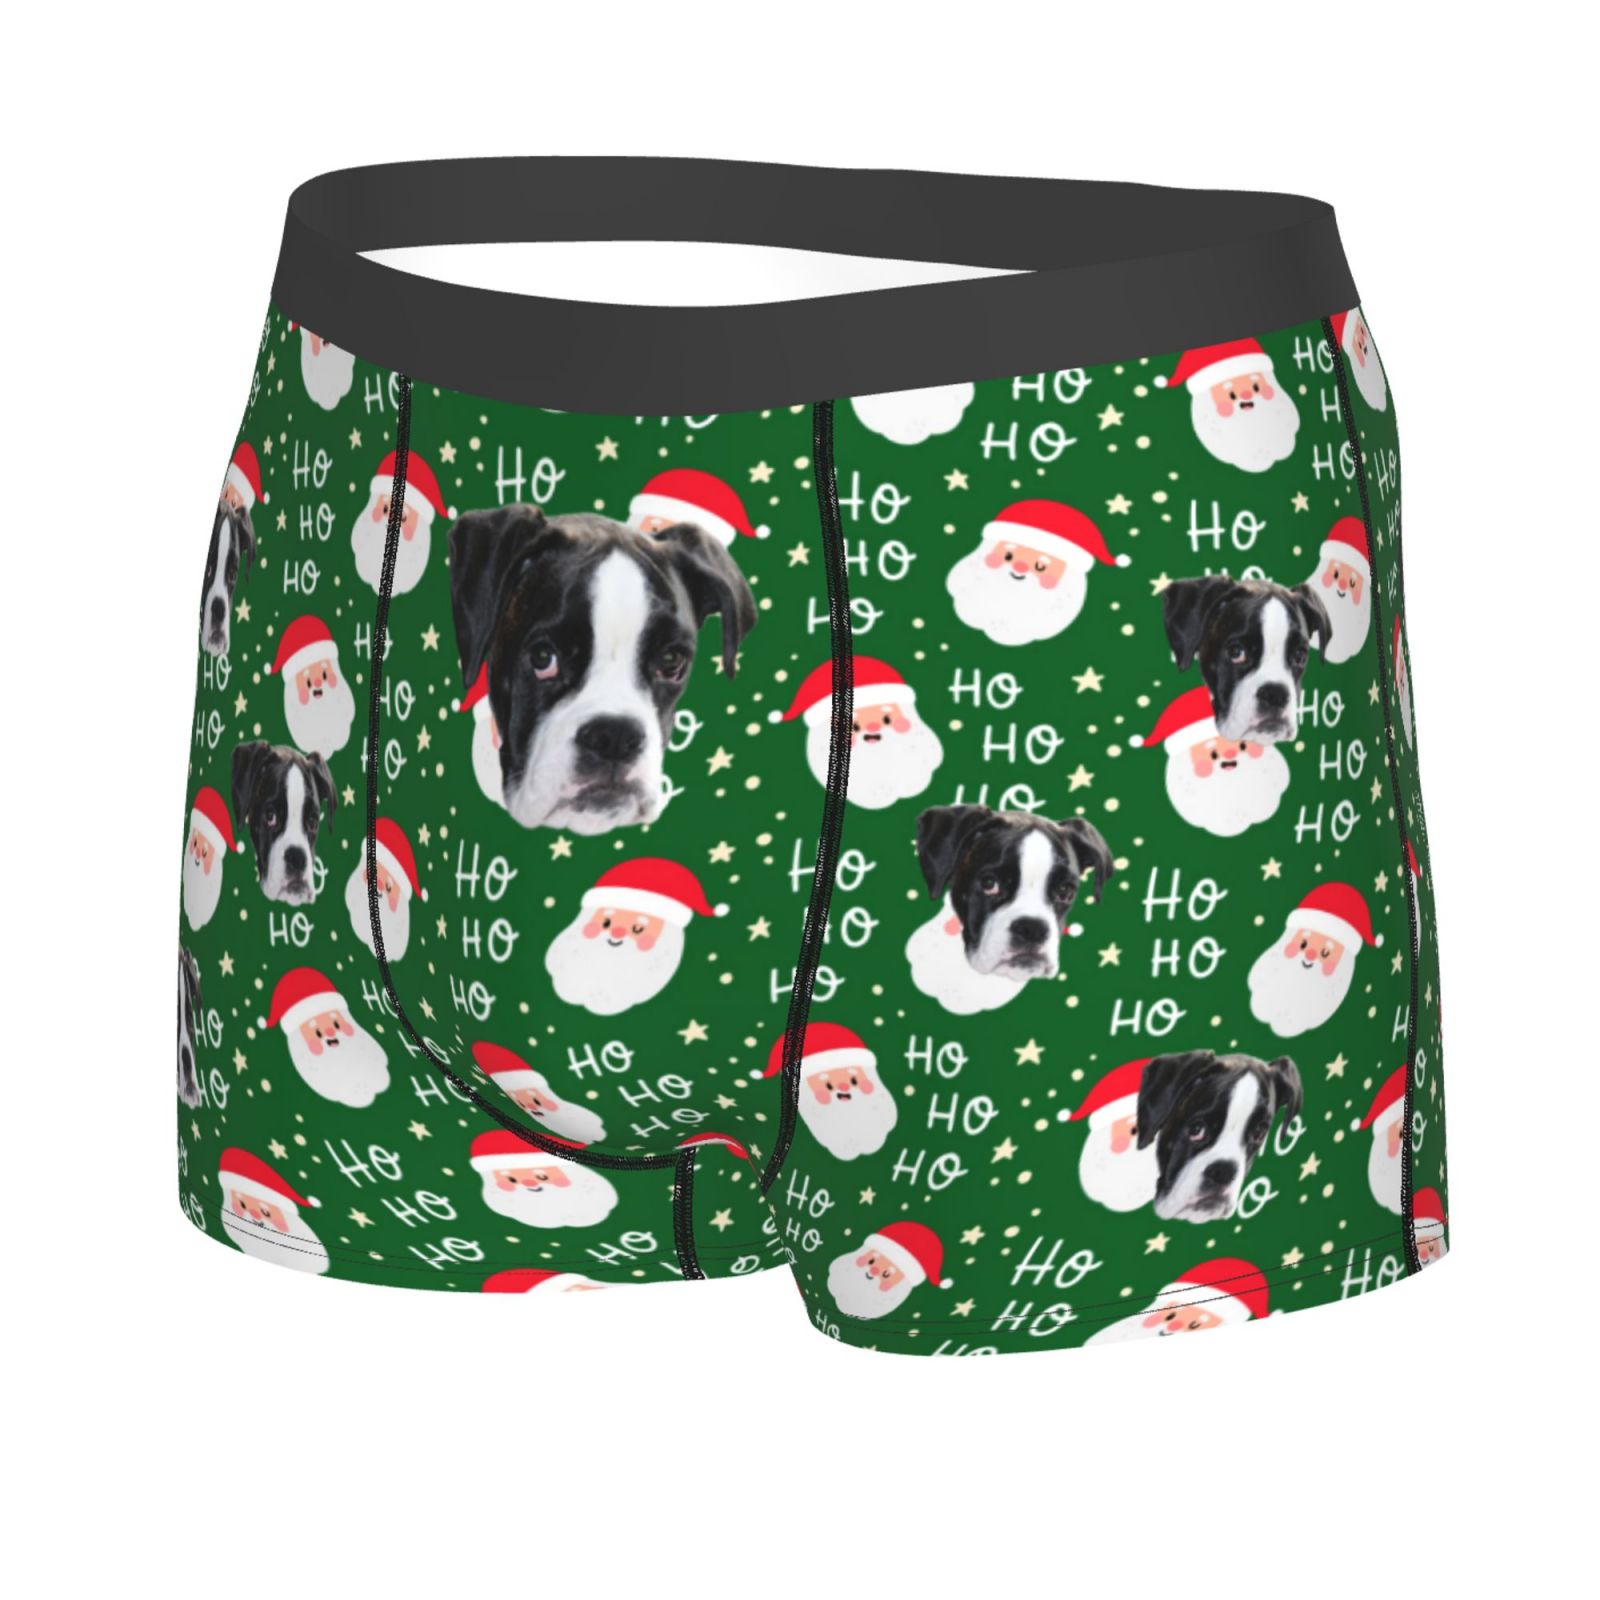 Personalized Face Underwear Shorts Santa Claus Custom Photo Boxers Christmas Gift